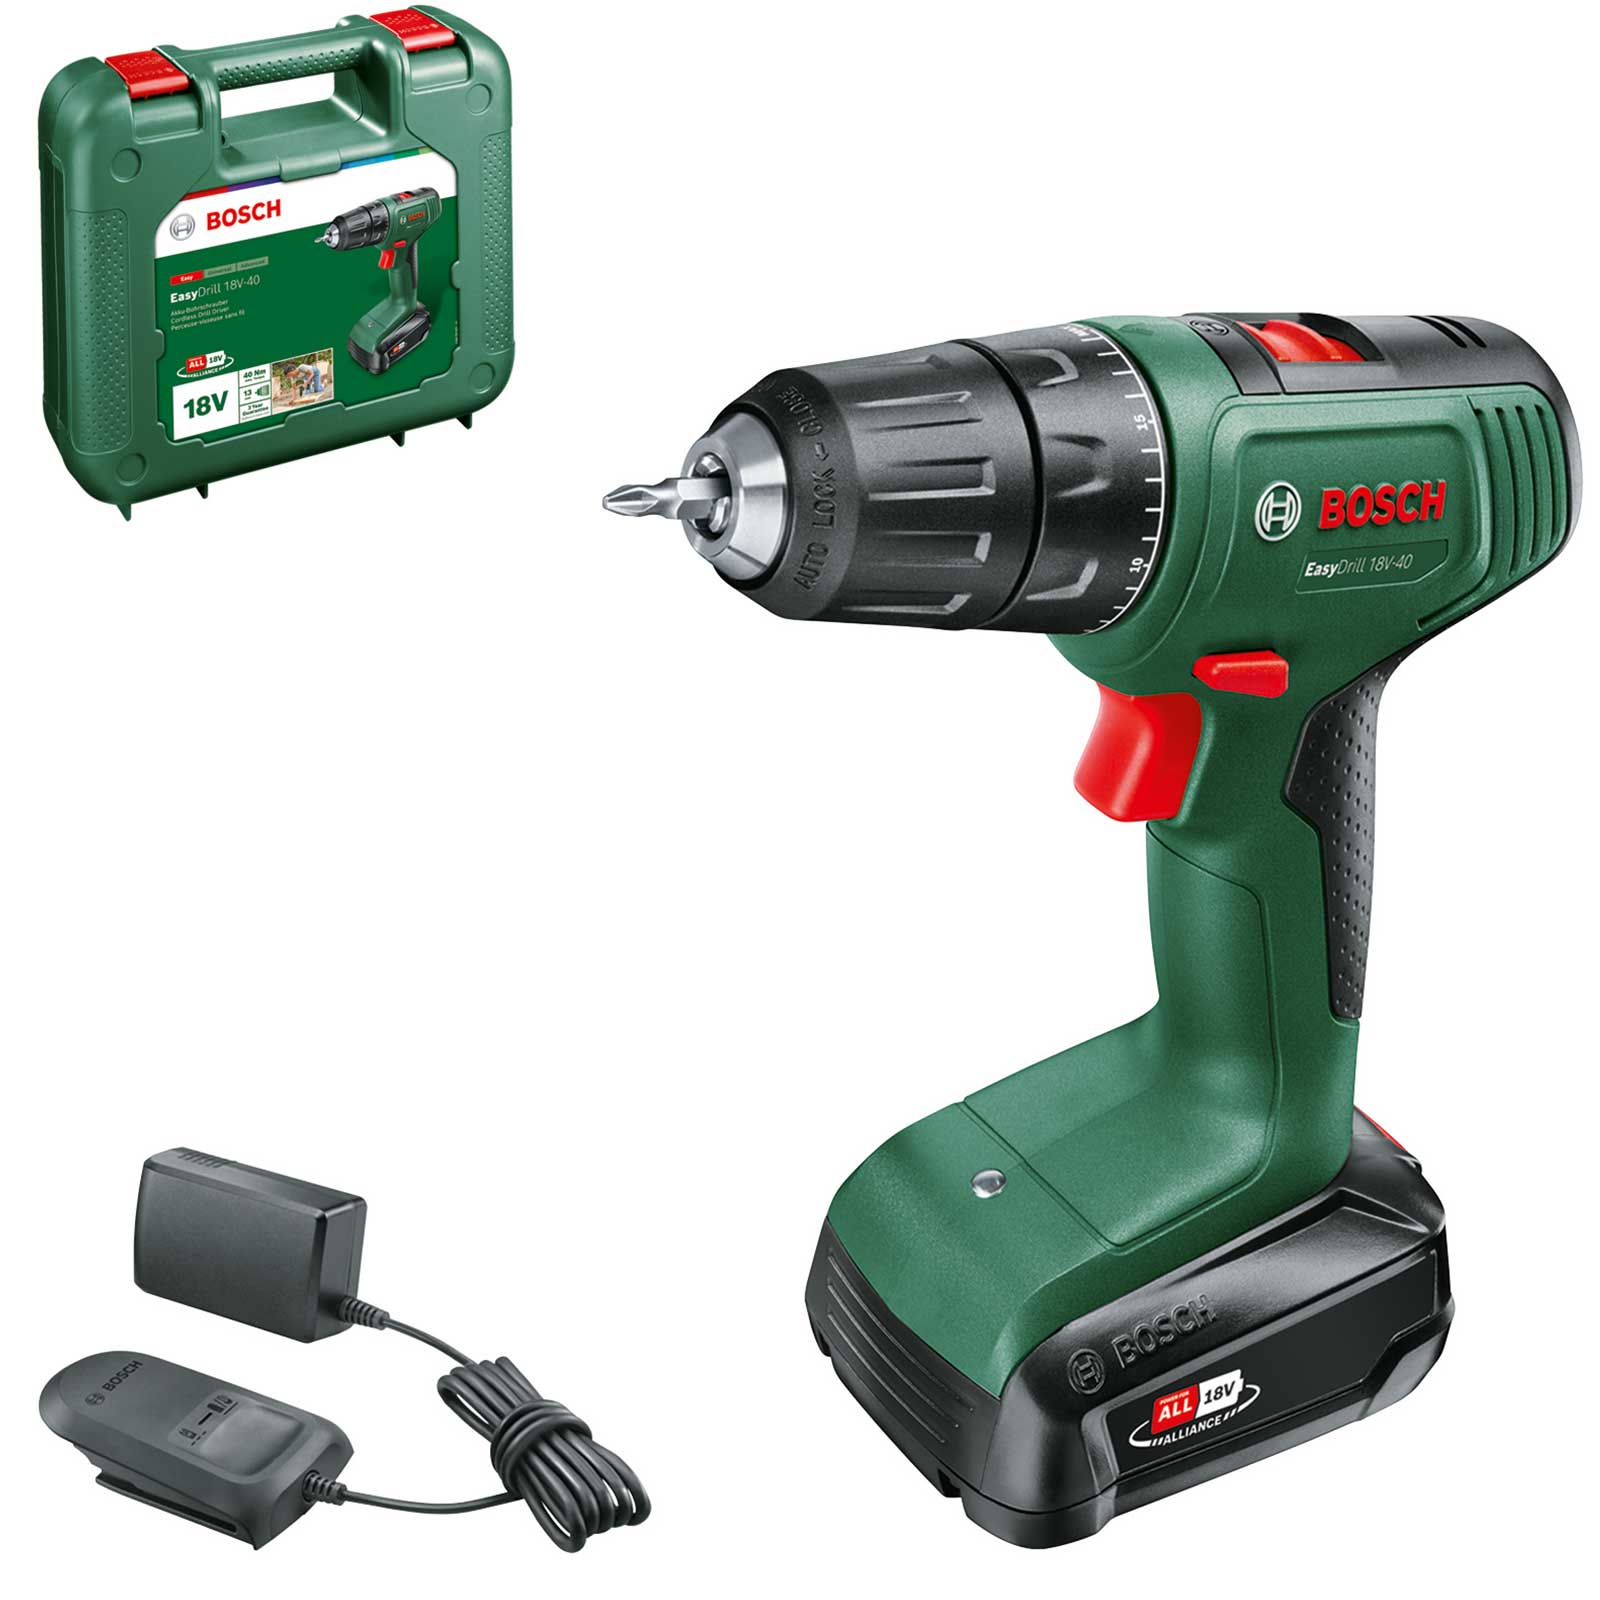 Image of Bosch EASYDRILL 18V-40 18v Cordless Drill Driver 1 x 1.5ah Li-ion Charger Case